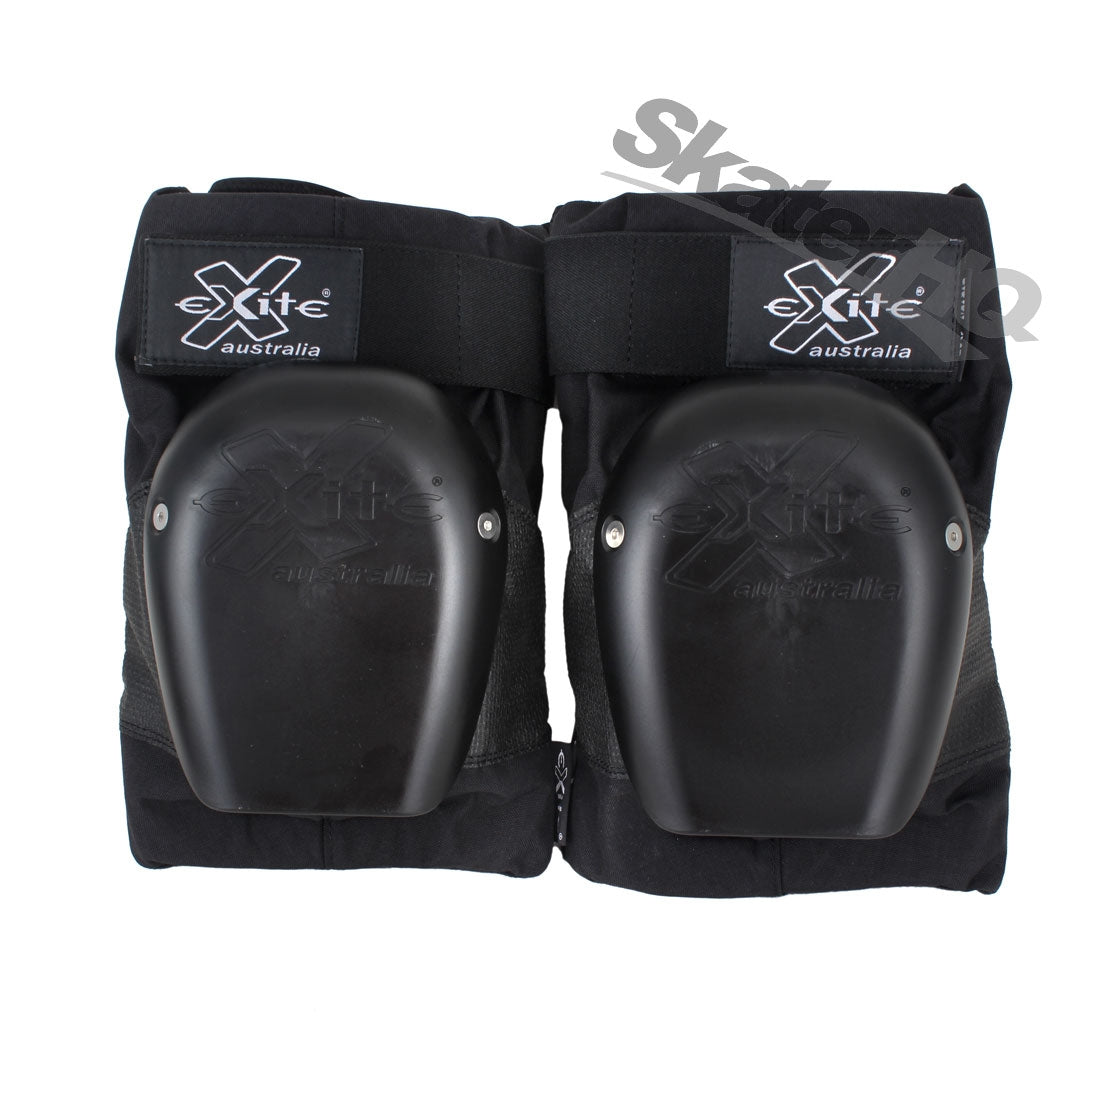 Exite Pro Max Modular Knee Pads - Large Protective Gear